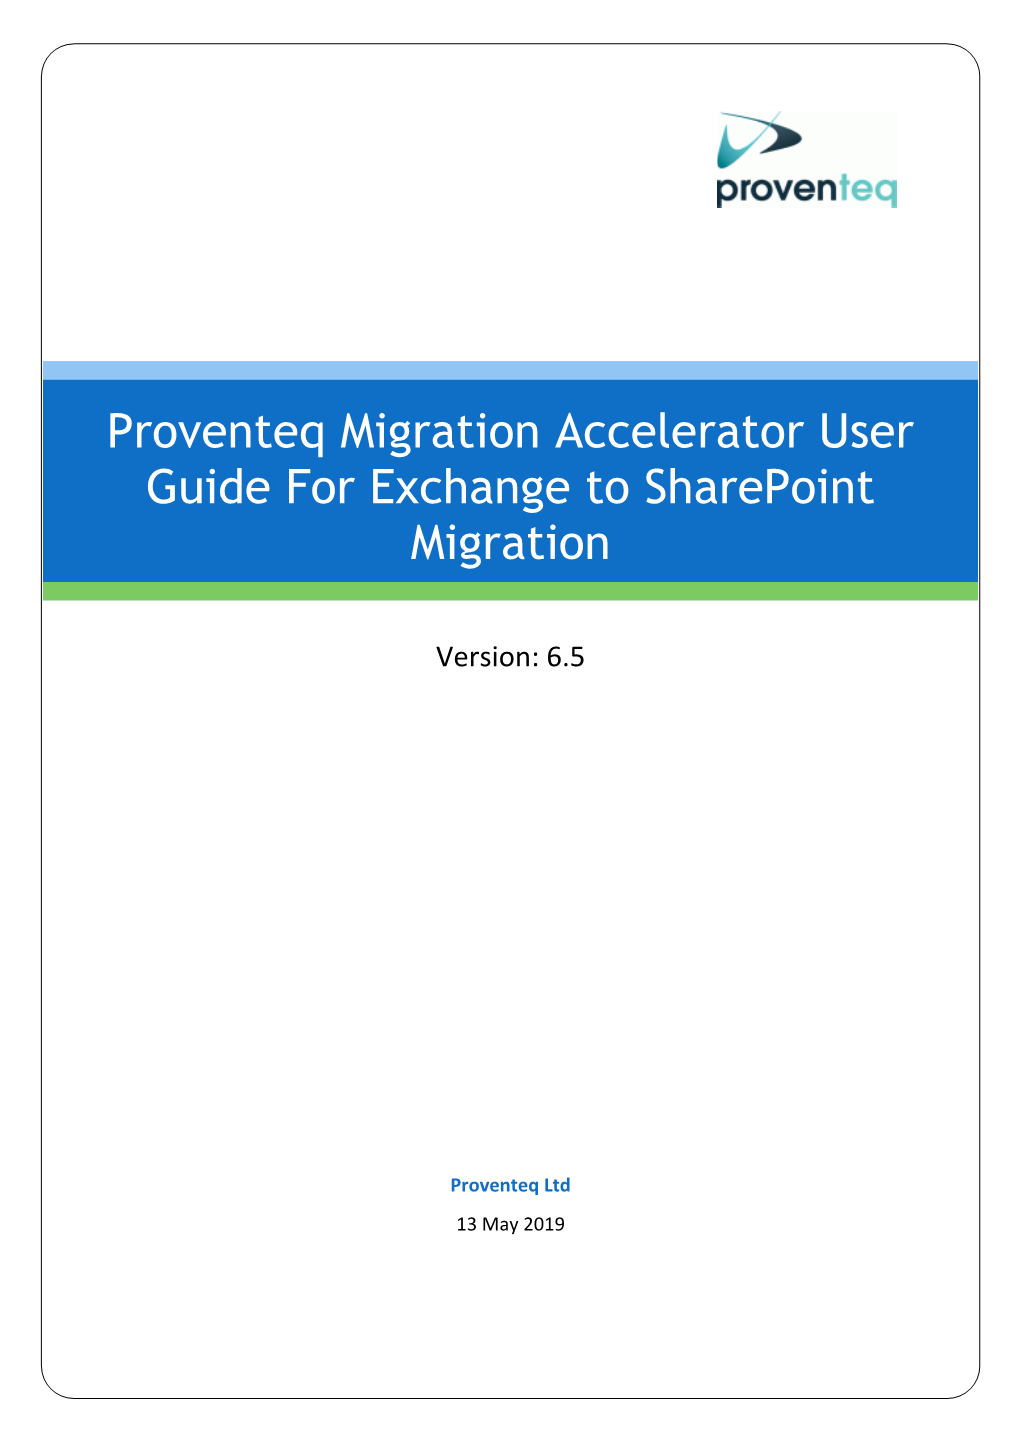 Proventeq Migration Accelerator User Guide for Exchange to Sharepoint Migration